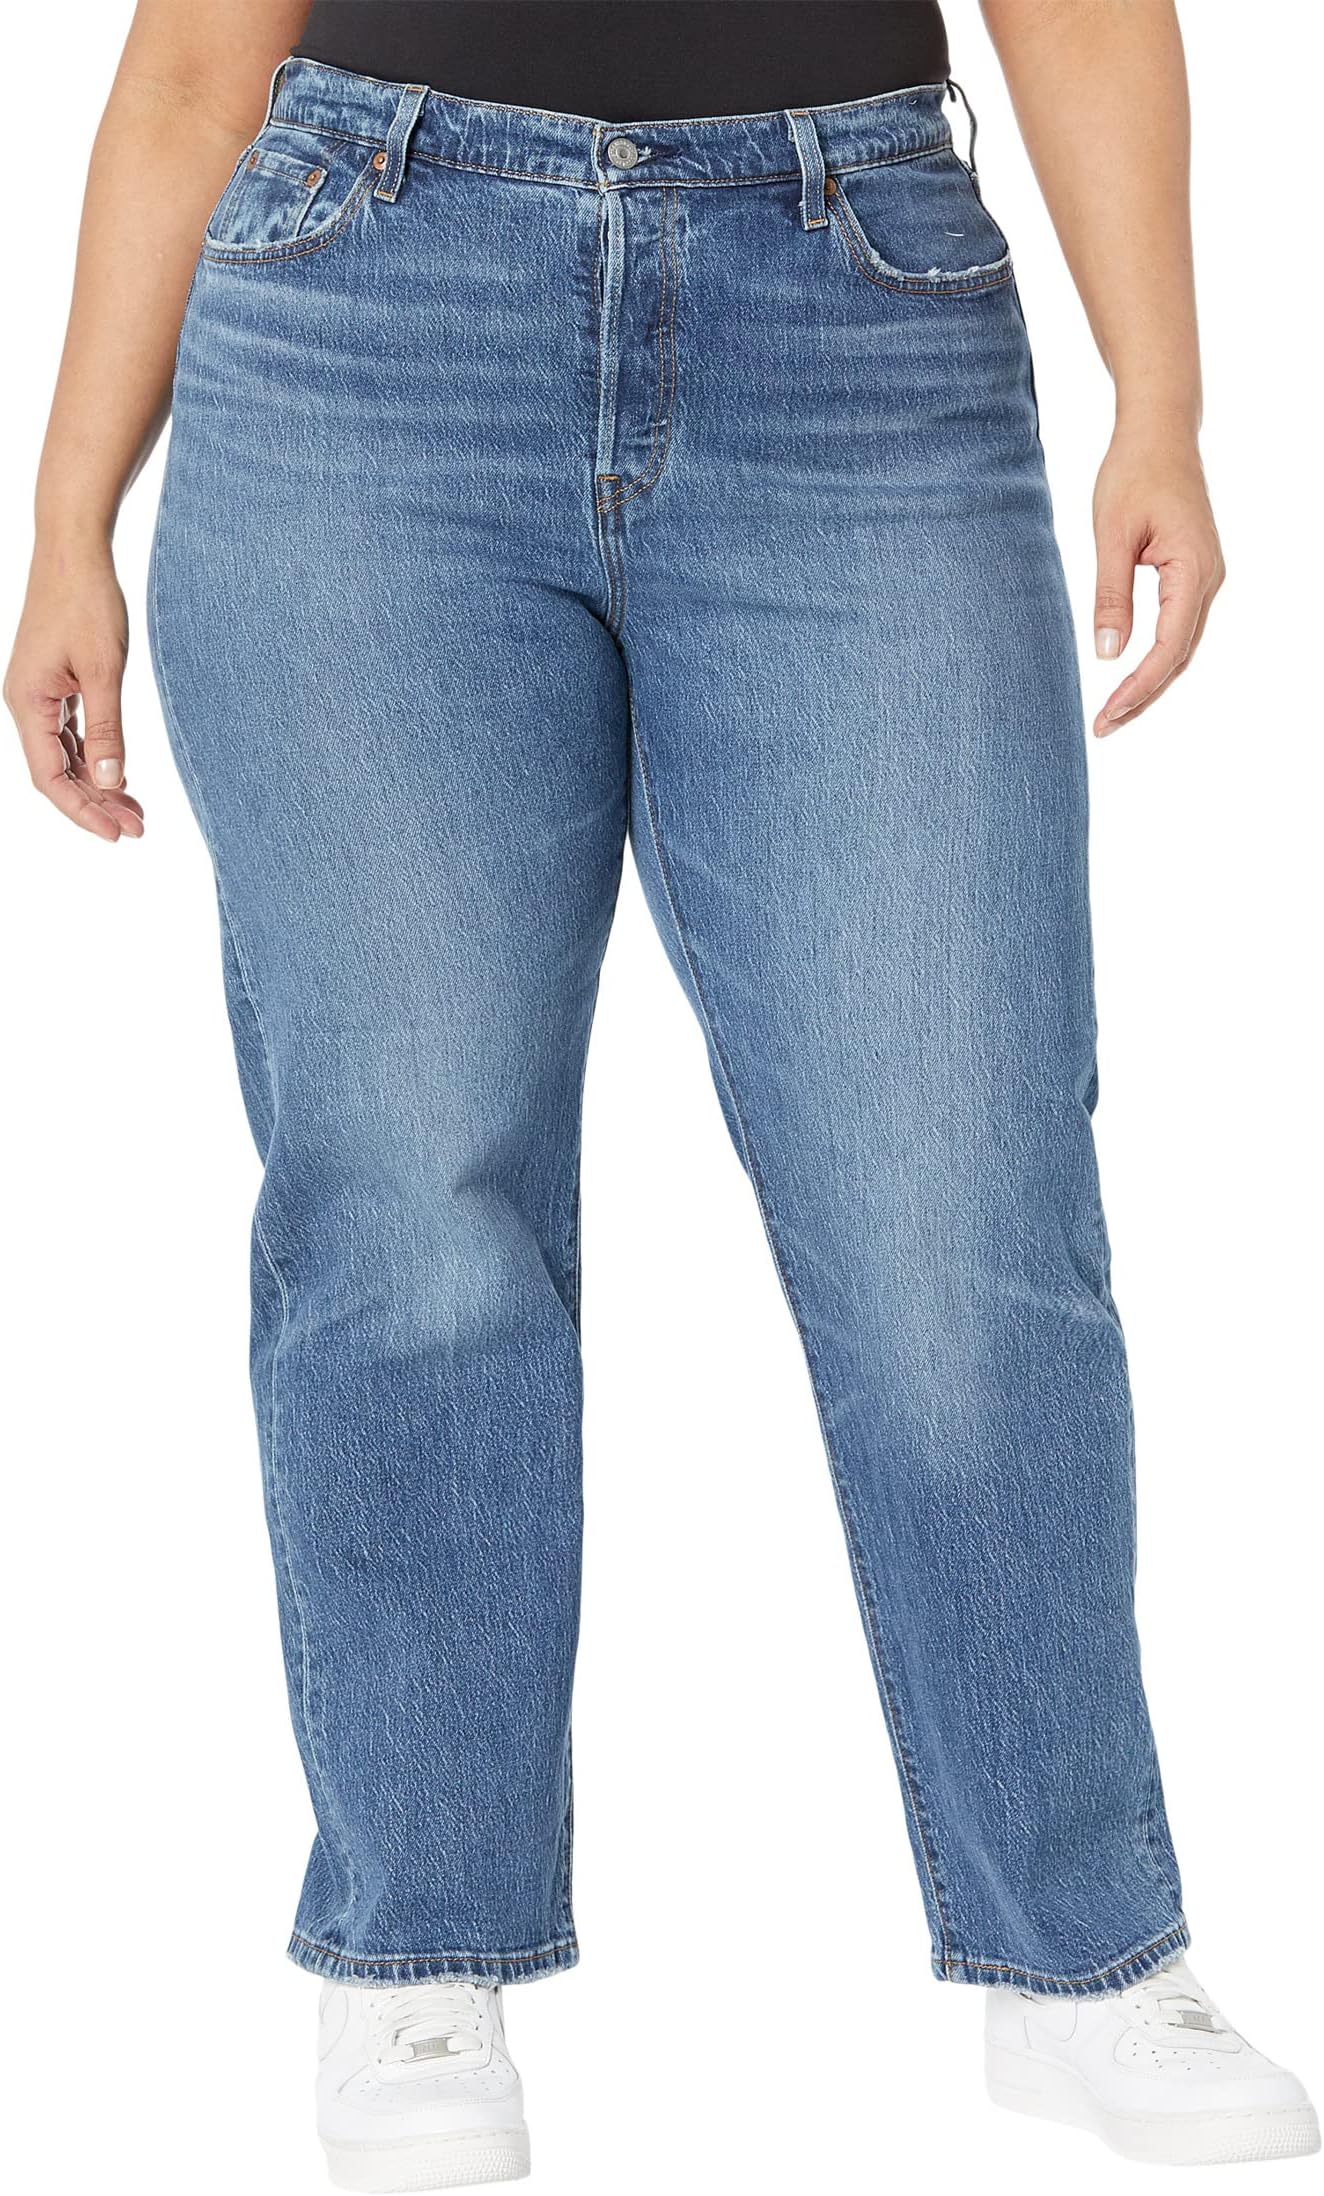 sequence 9 см Джинсы 501 Jeans For Women Levi's, цвет Salsa In Sequence